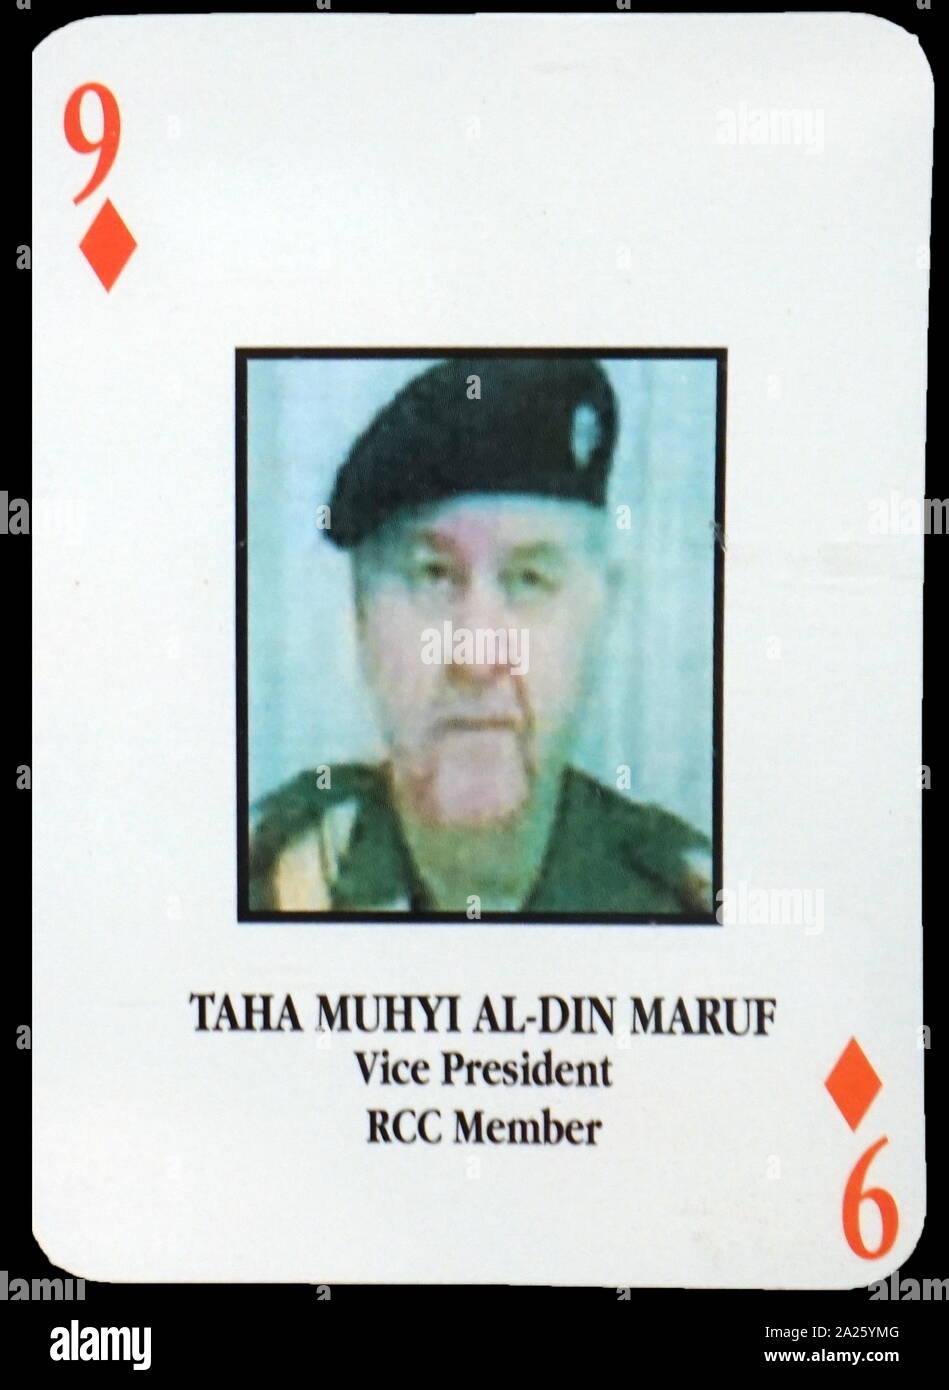 Most-wanted Iraqi playing cards - Taha Muhyi Al-Din Maruf (Vice President, RCC Member). The U.S. military developed a set of playing cards to help troop identify the most-wanted members of President Saddam Hussein's government during the 2003 invasion of Iraq. Stock Photo